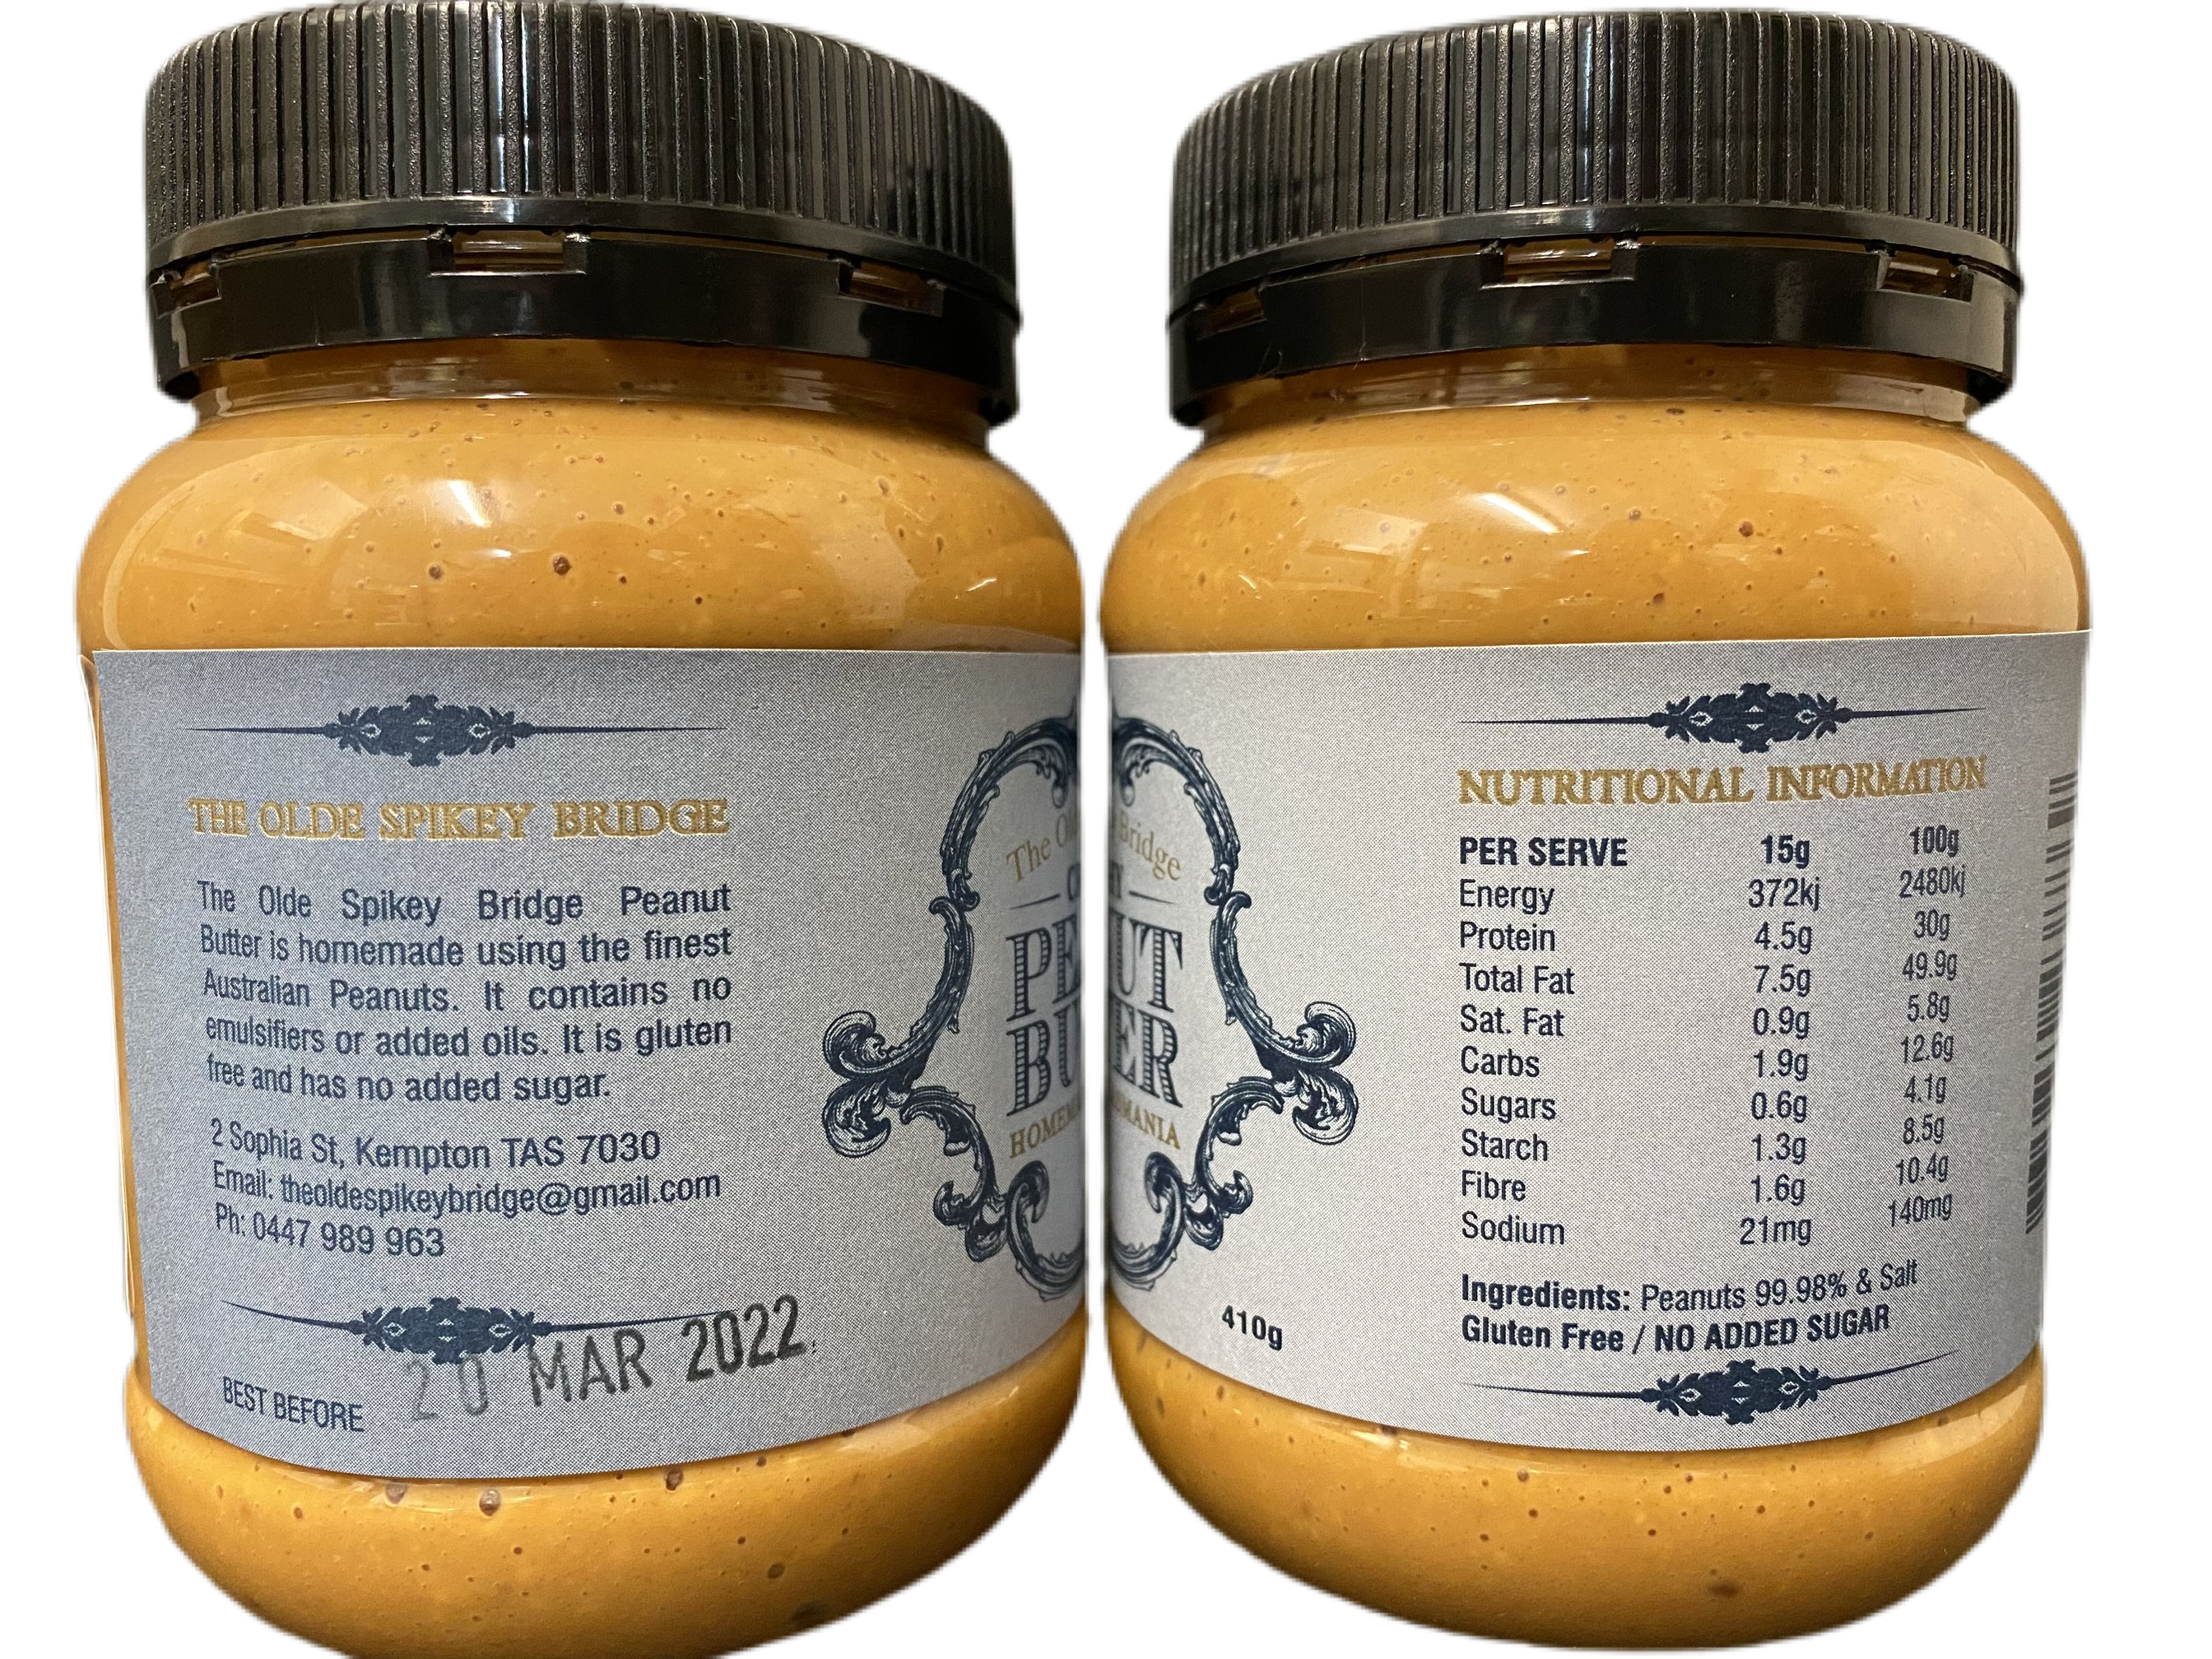 peanut butter blurb and nutritional information panel